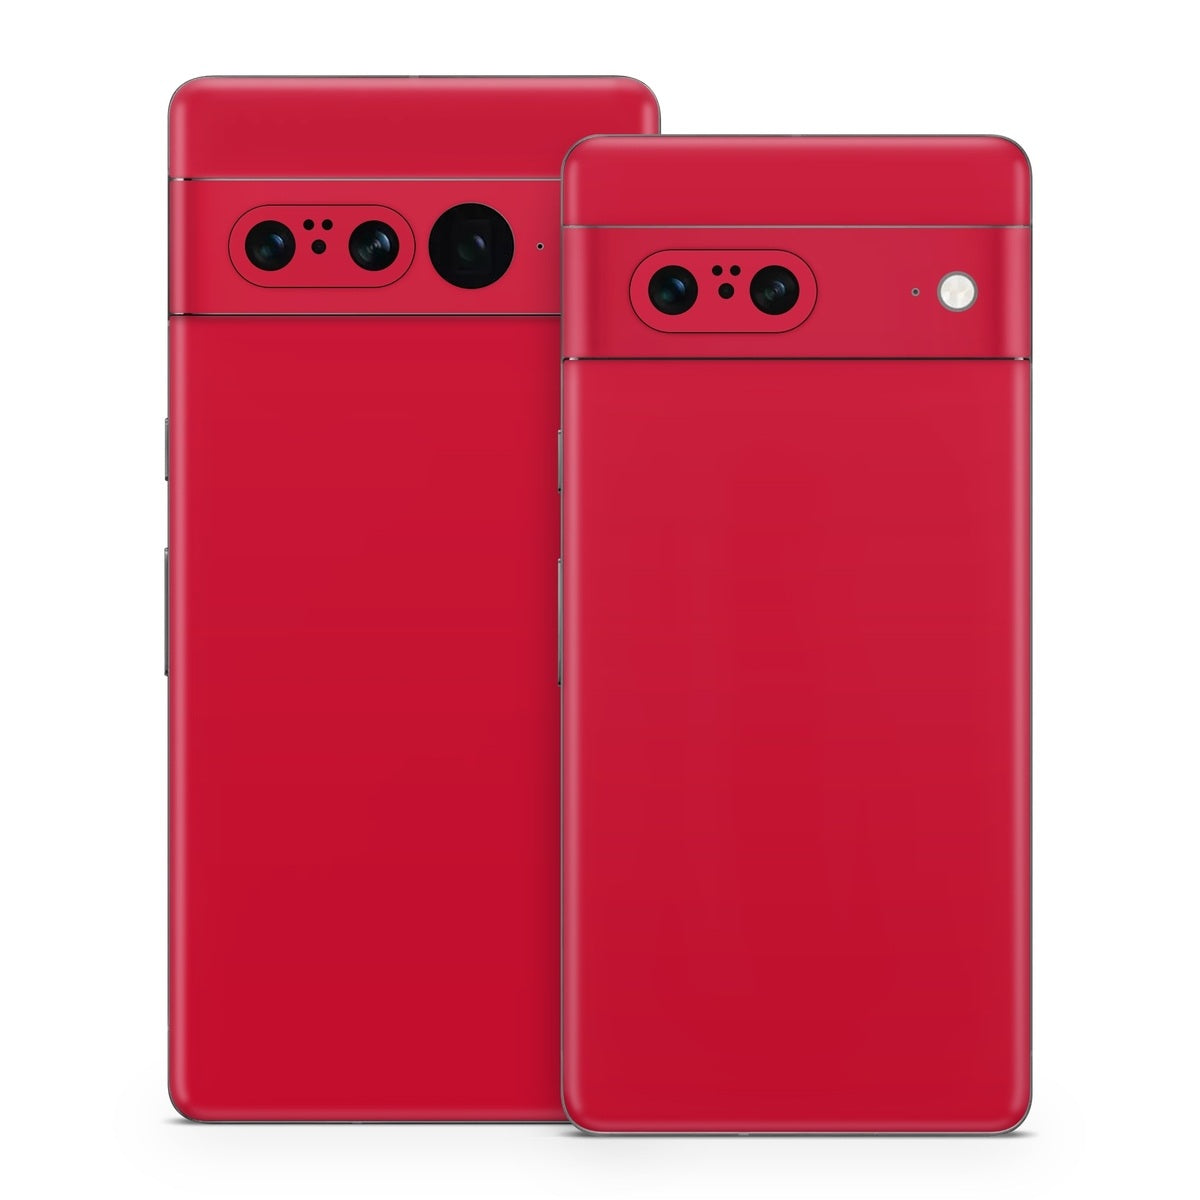 Solid State Red - Google Pixel 7 Skin